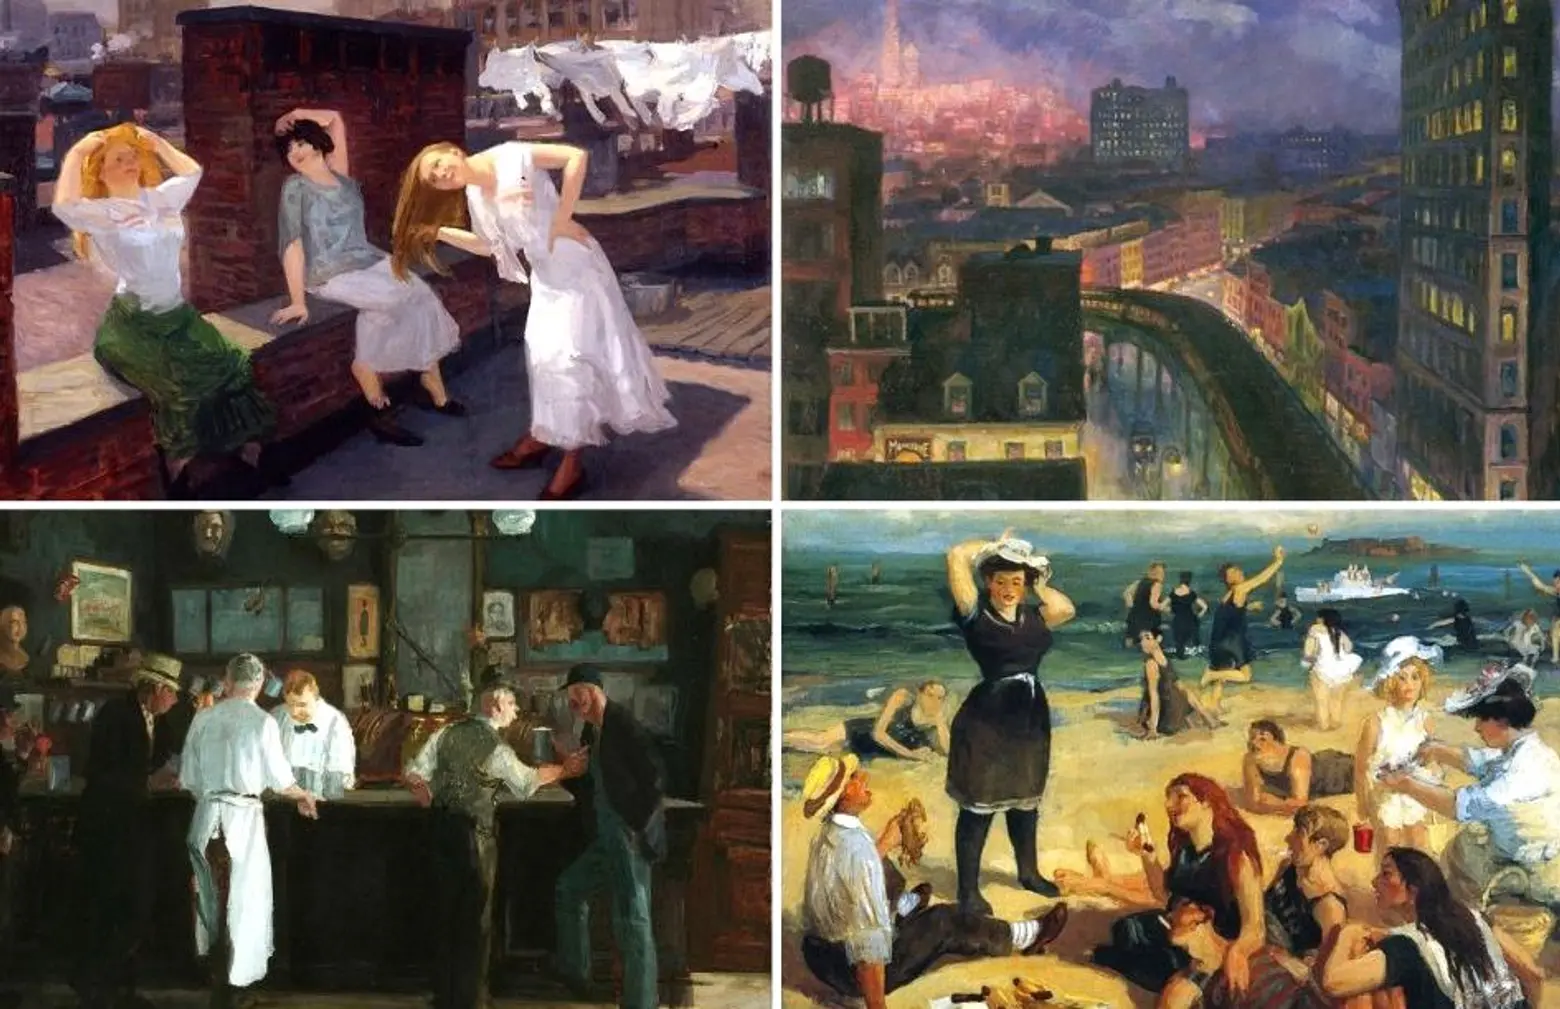 Elevated rails, rooftops, and McSorley’s: How painter John Sloan captured 20th-century Manhattan